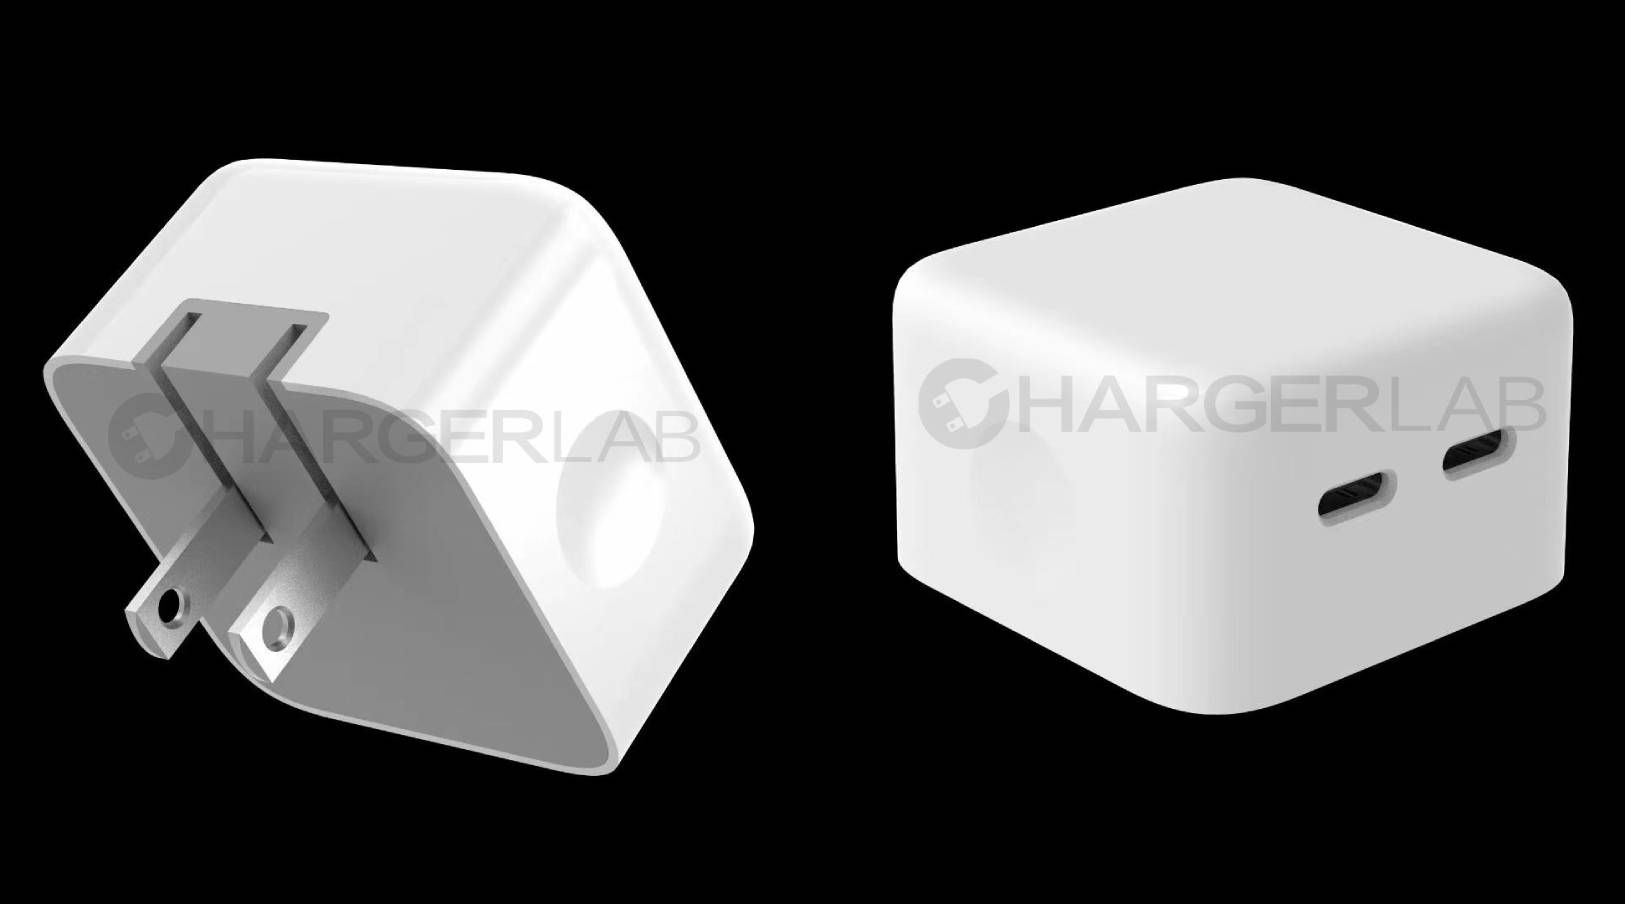 Apple’s Rumored Dual USB-C Port Charger Allegedly Shown in Leaked Images – MacRumors